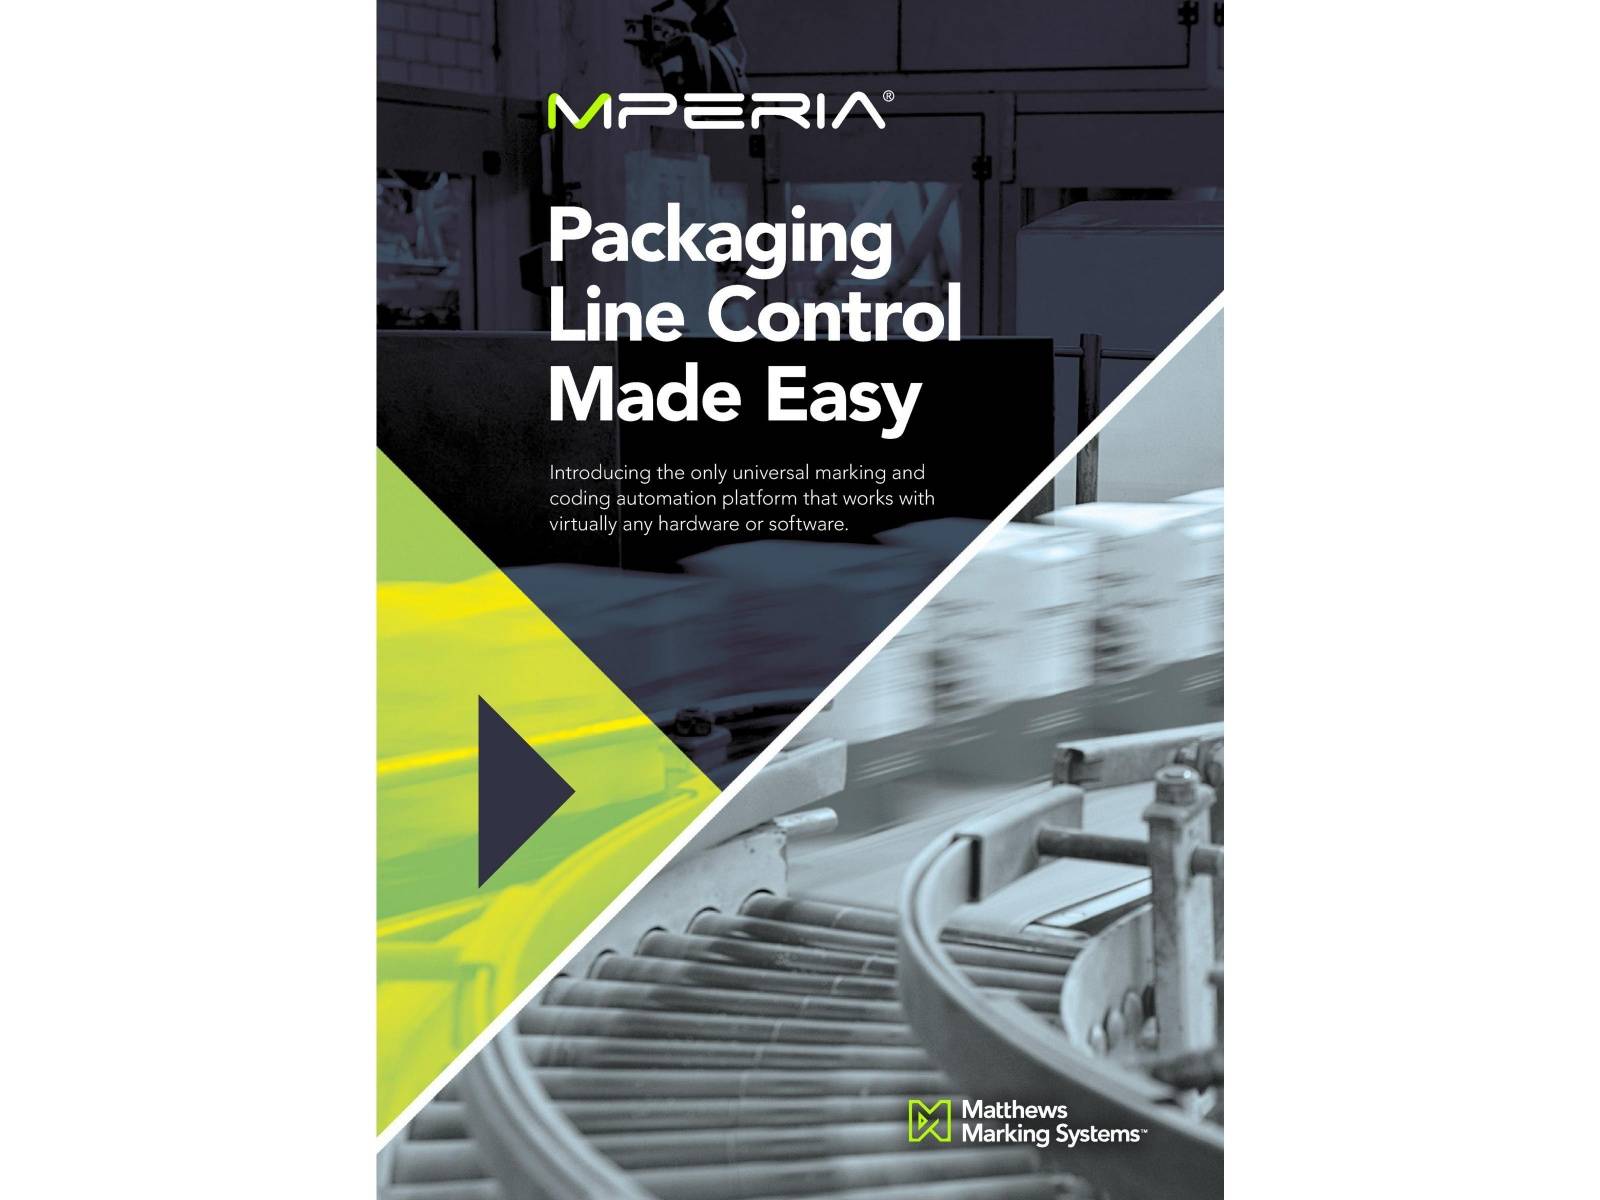 MPERIA Packaging Line Control Made Easy Consolidated control over all marking and coding equipment